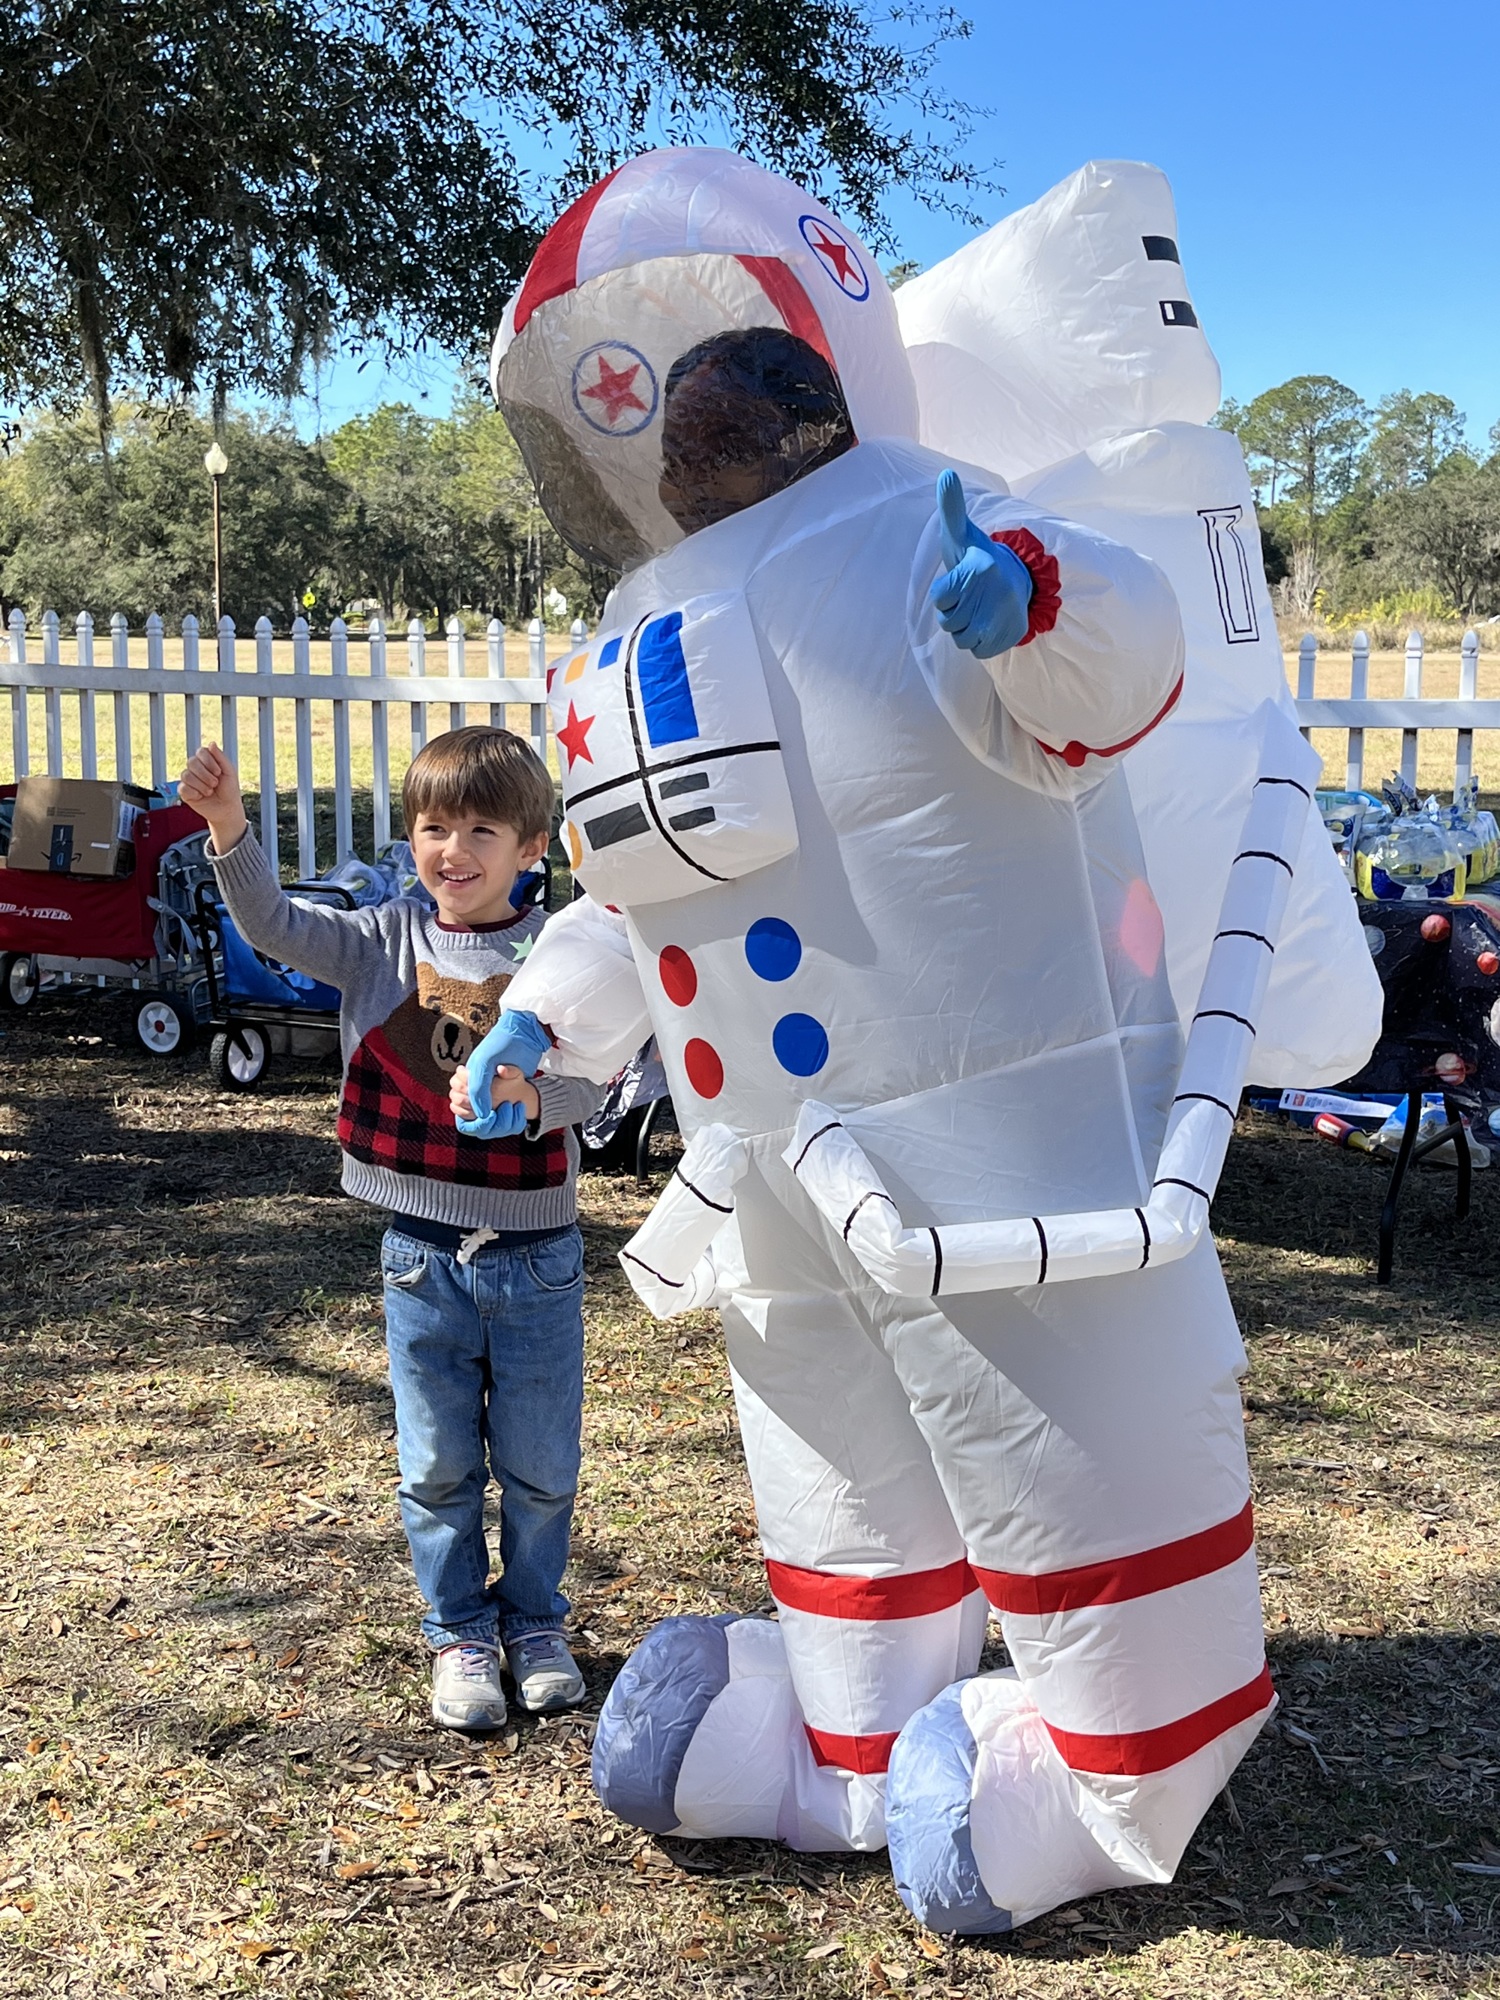 Liam Manley, who is 5, says hello to Shenicka Claxton dressed as an astronaut.